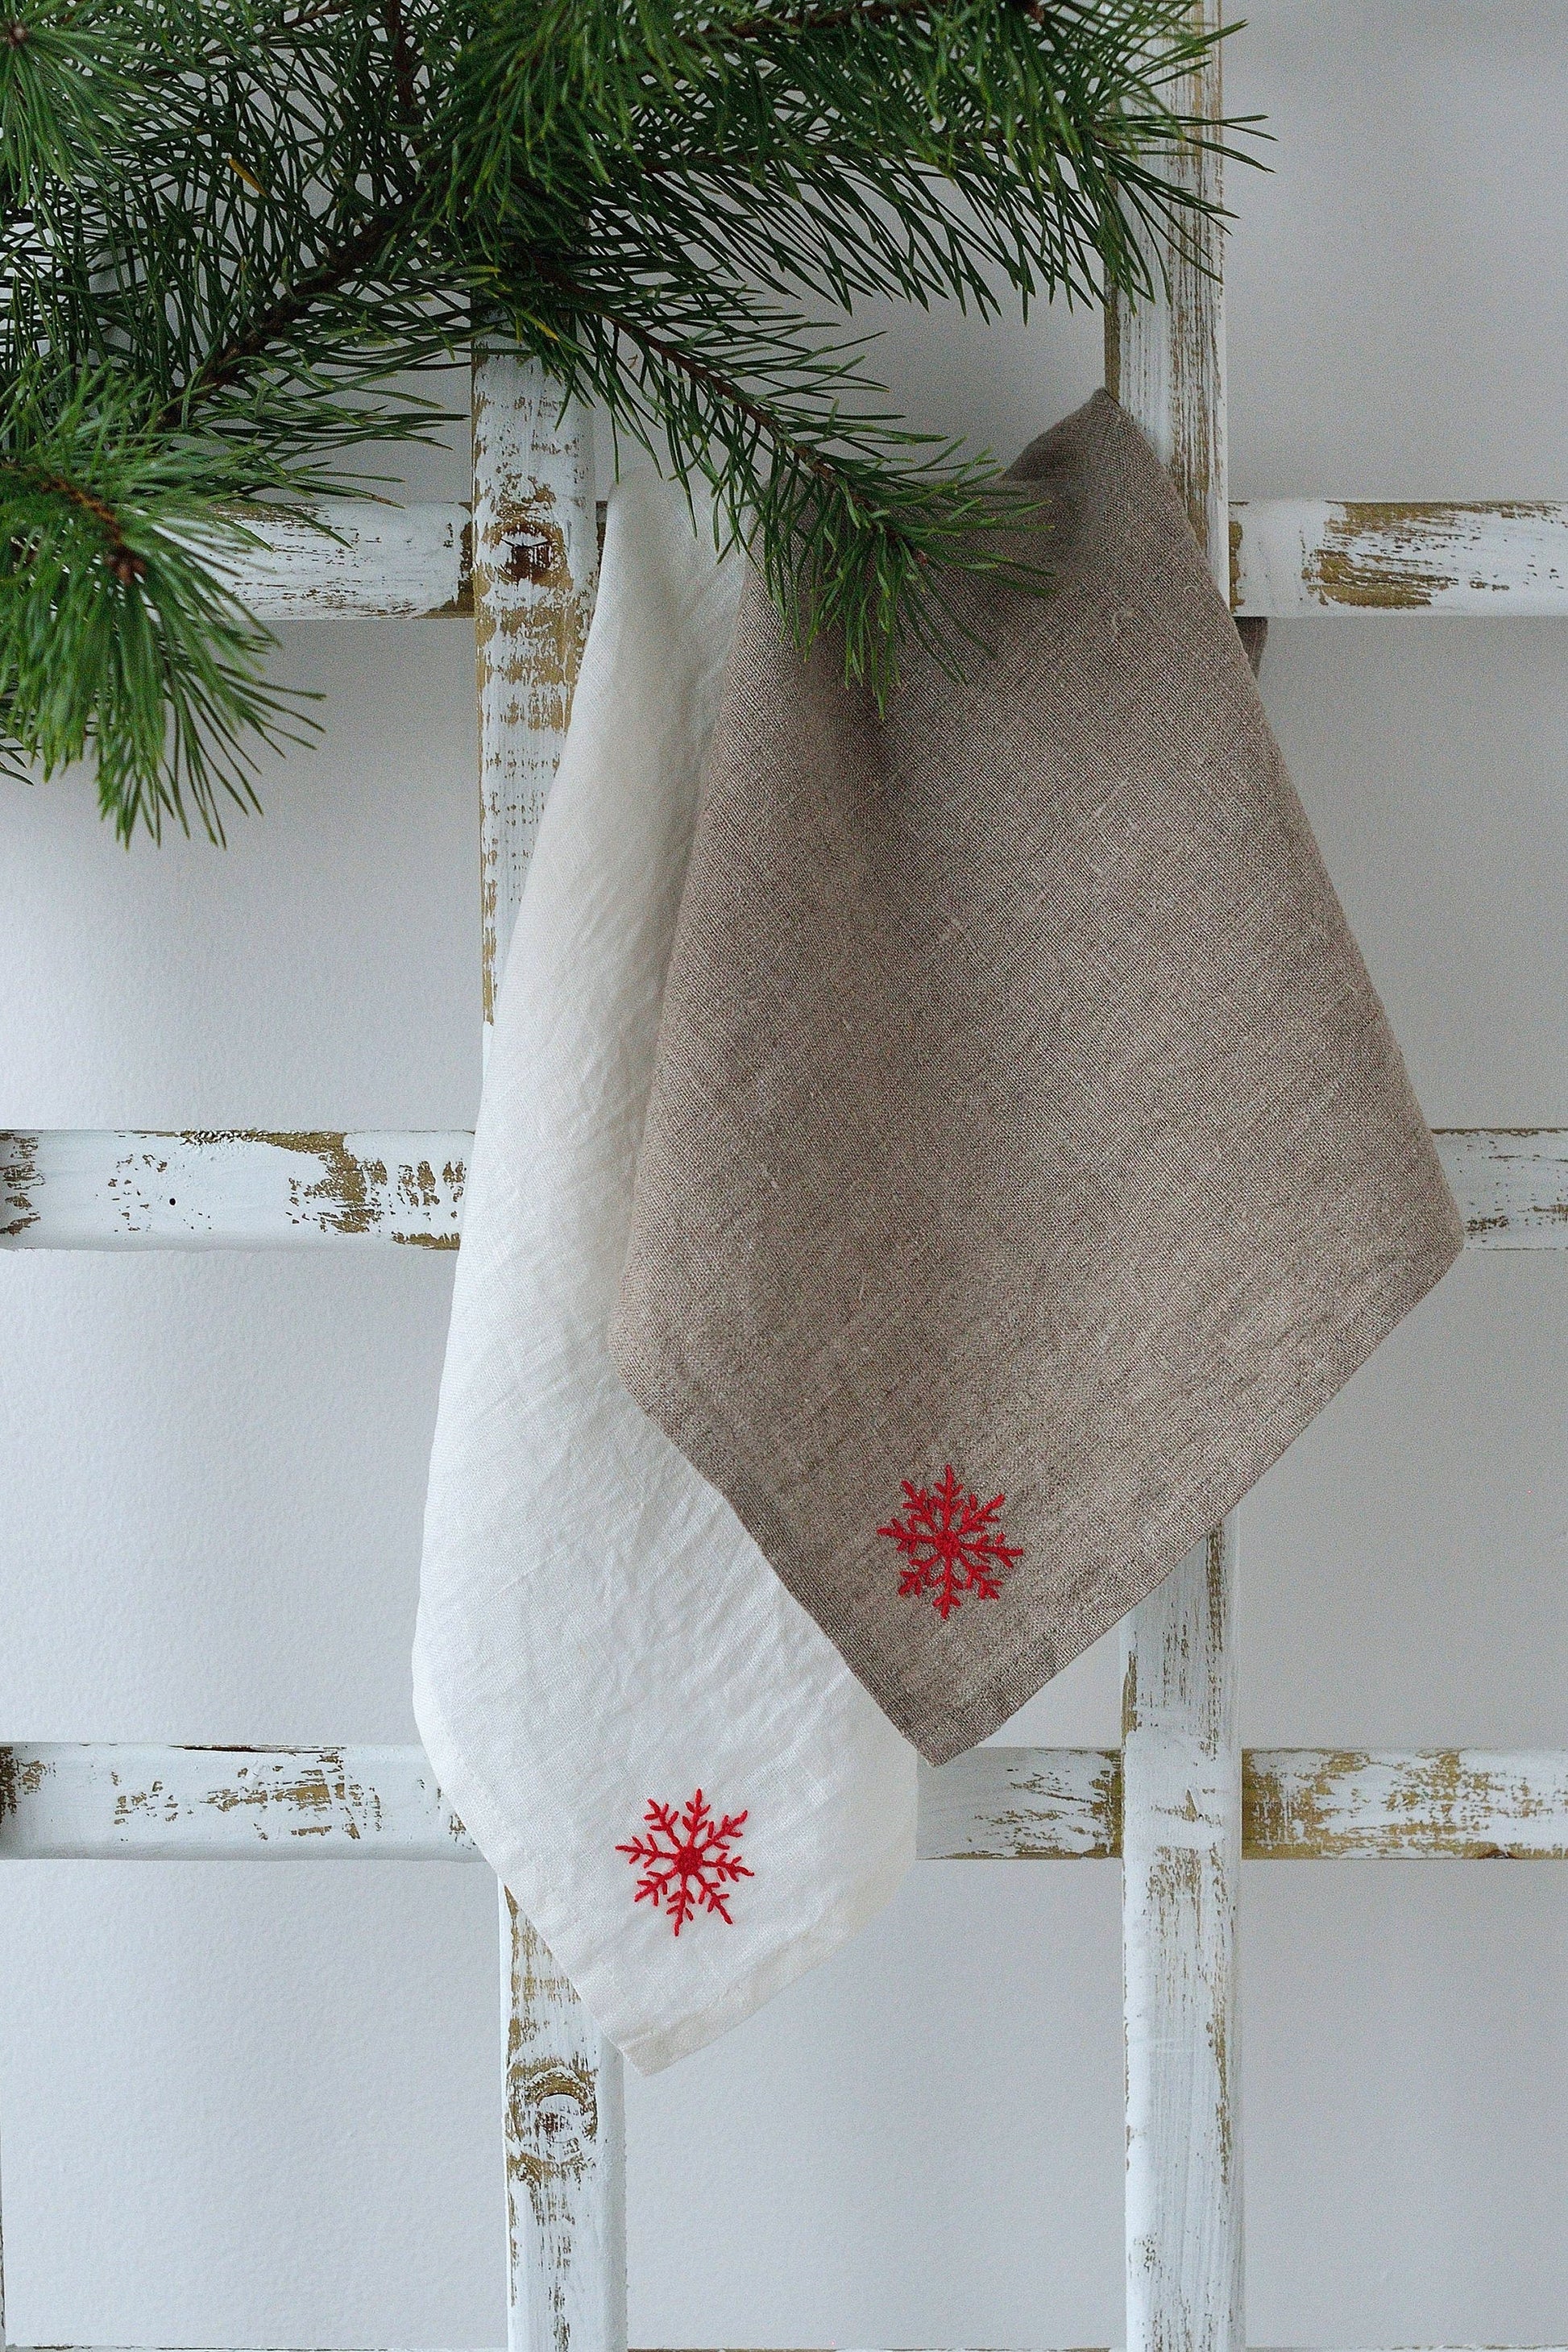 Linen Towel with Handmade Snowflakes Embroidery/ Linen Kitchen Towel Christmas Gift/ Vintage Christmas Linen/ Linen Gift Luxury